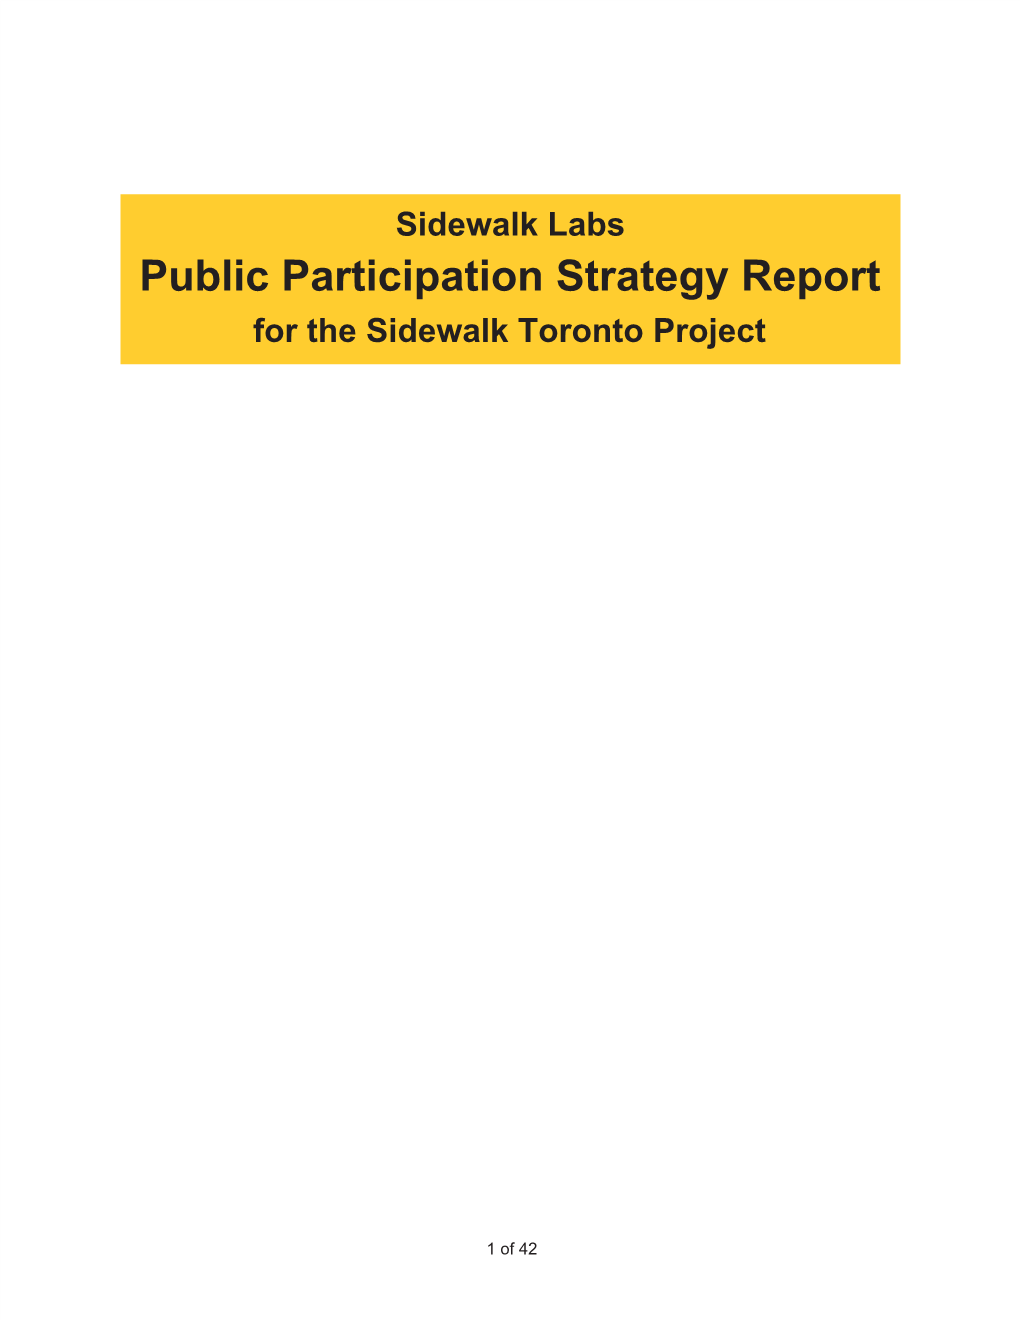 Public Participation Strategy Report for the Sidewalk Toronto Project